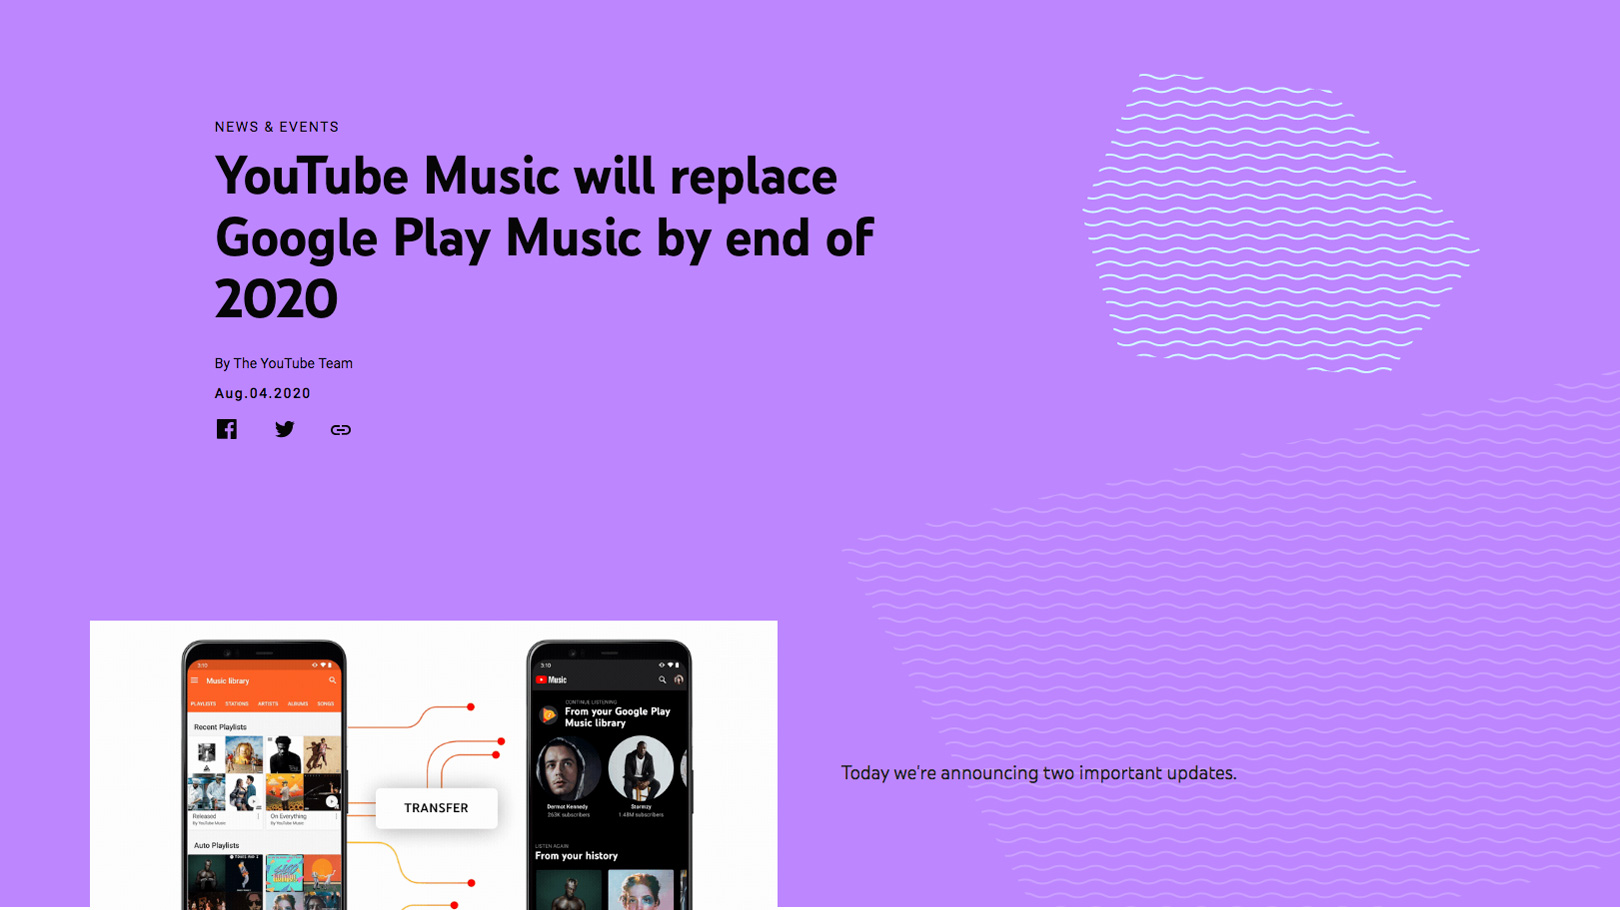 (Screenshot from https://blog.youtube/news-and-events/youtube-music-will-replace-google-play-music-end-2020/)